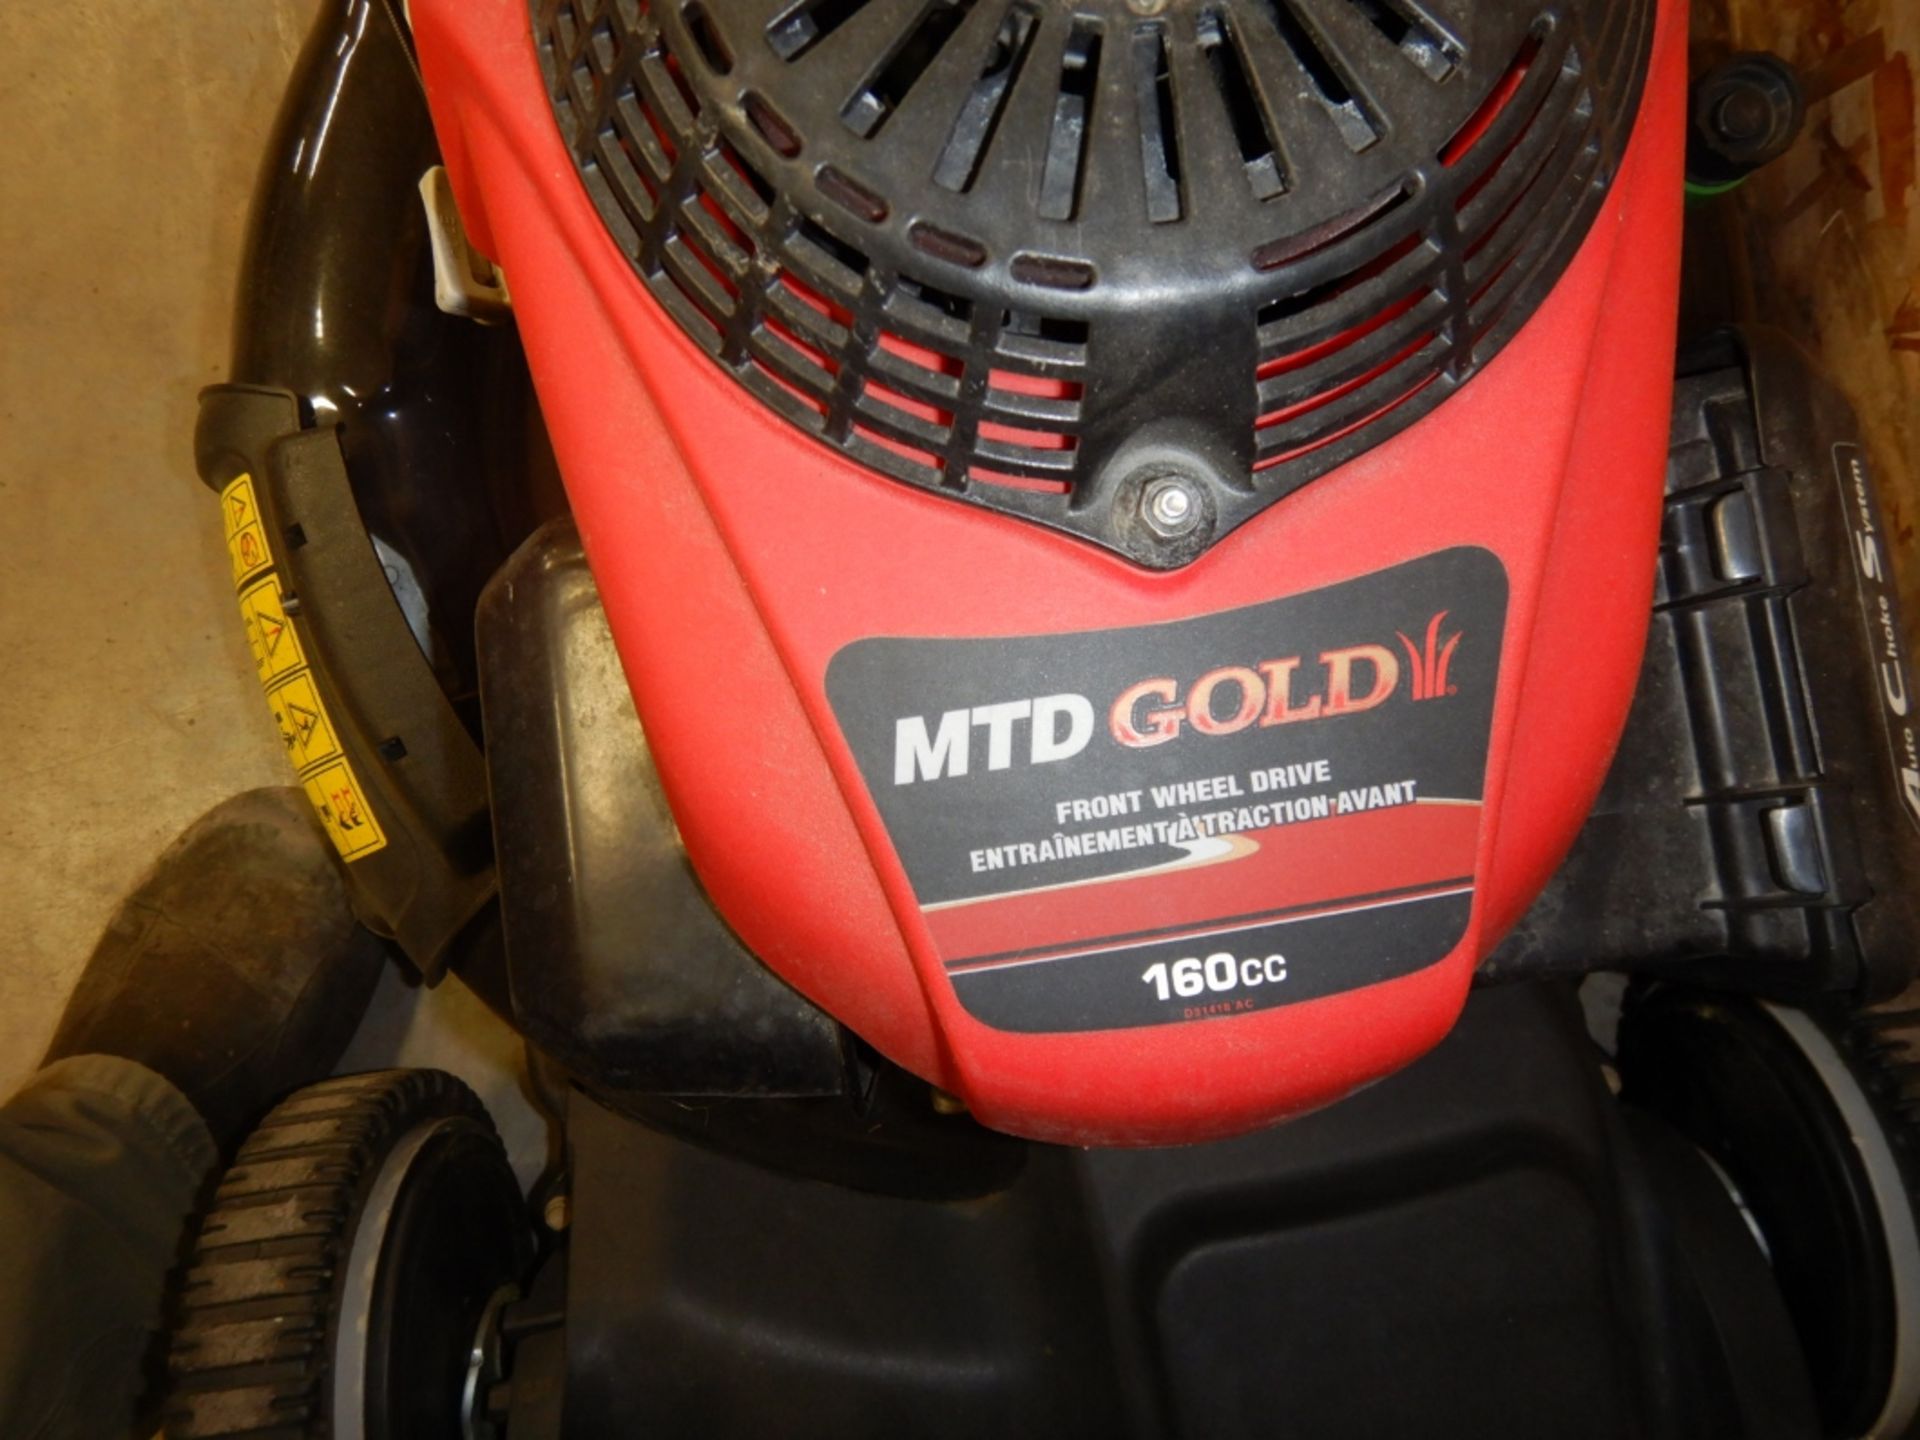 MTD GOLD PUSH TYPE LAWN MOVER W/ 1600CC HONDA ENGINE AND BAGGER - Image 3 of 3